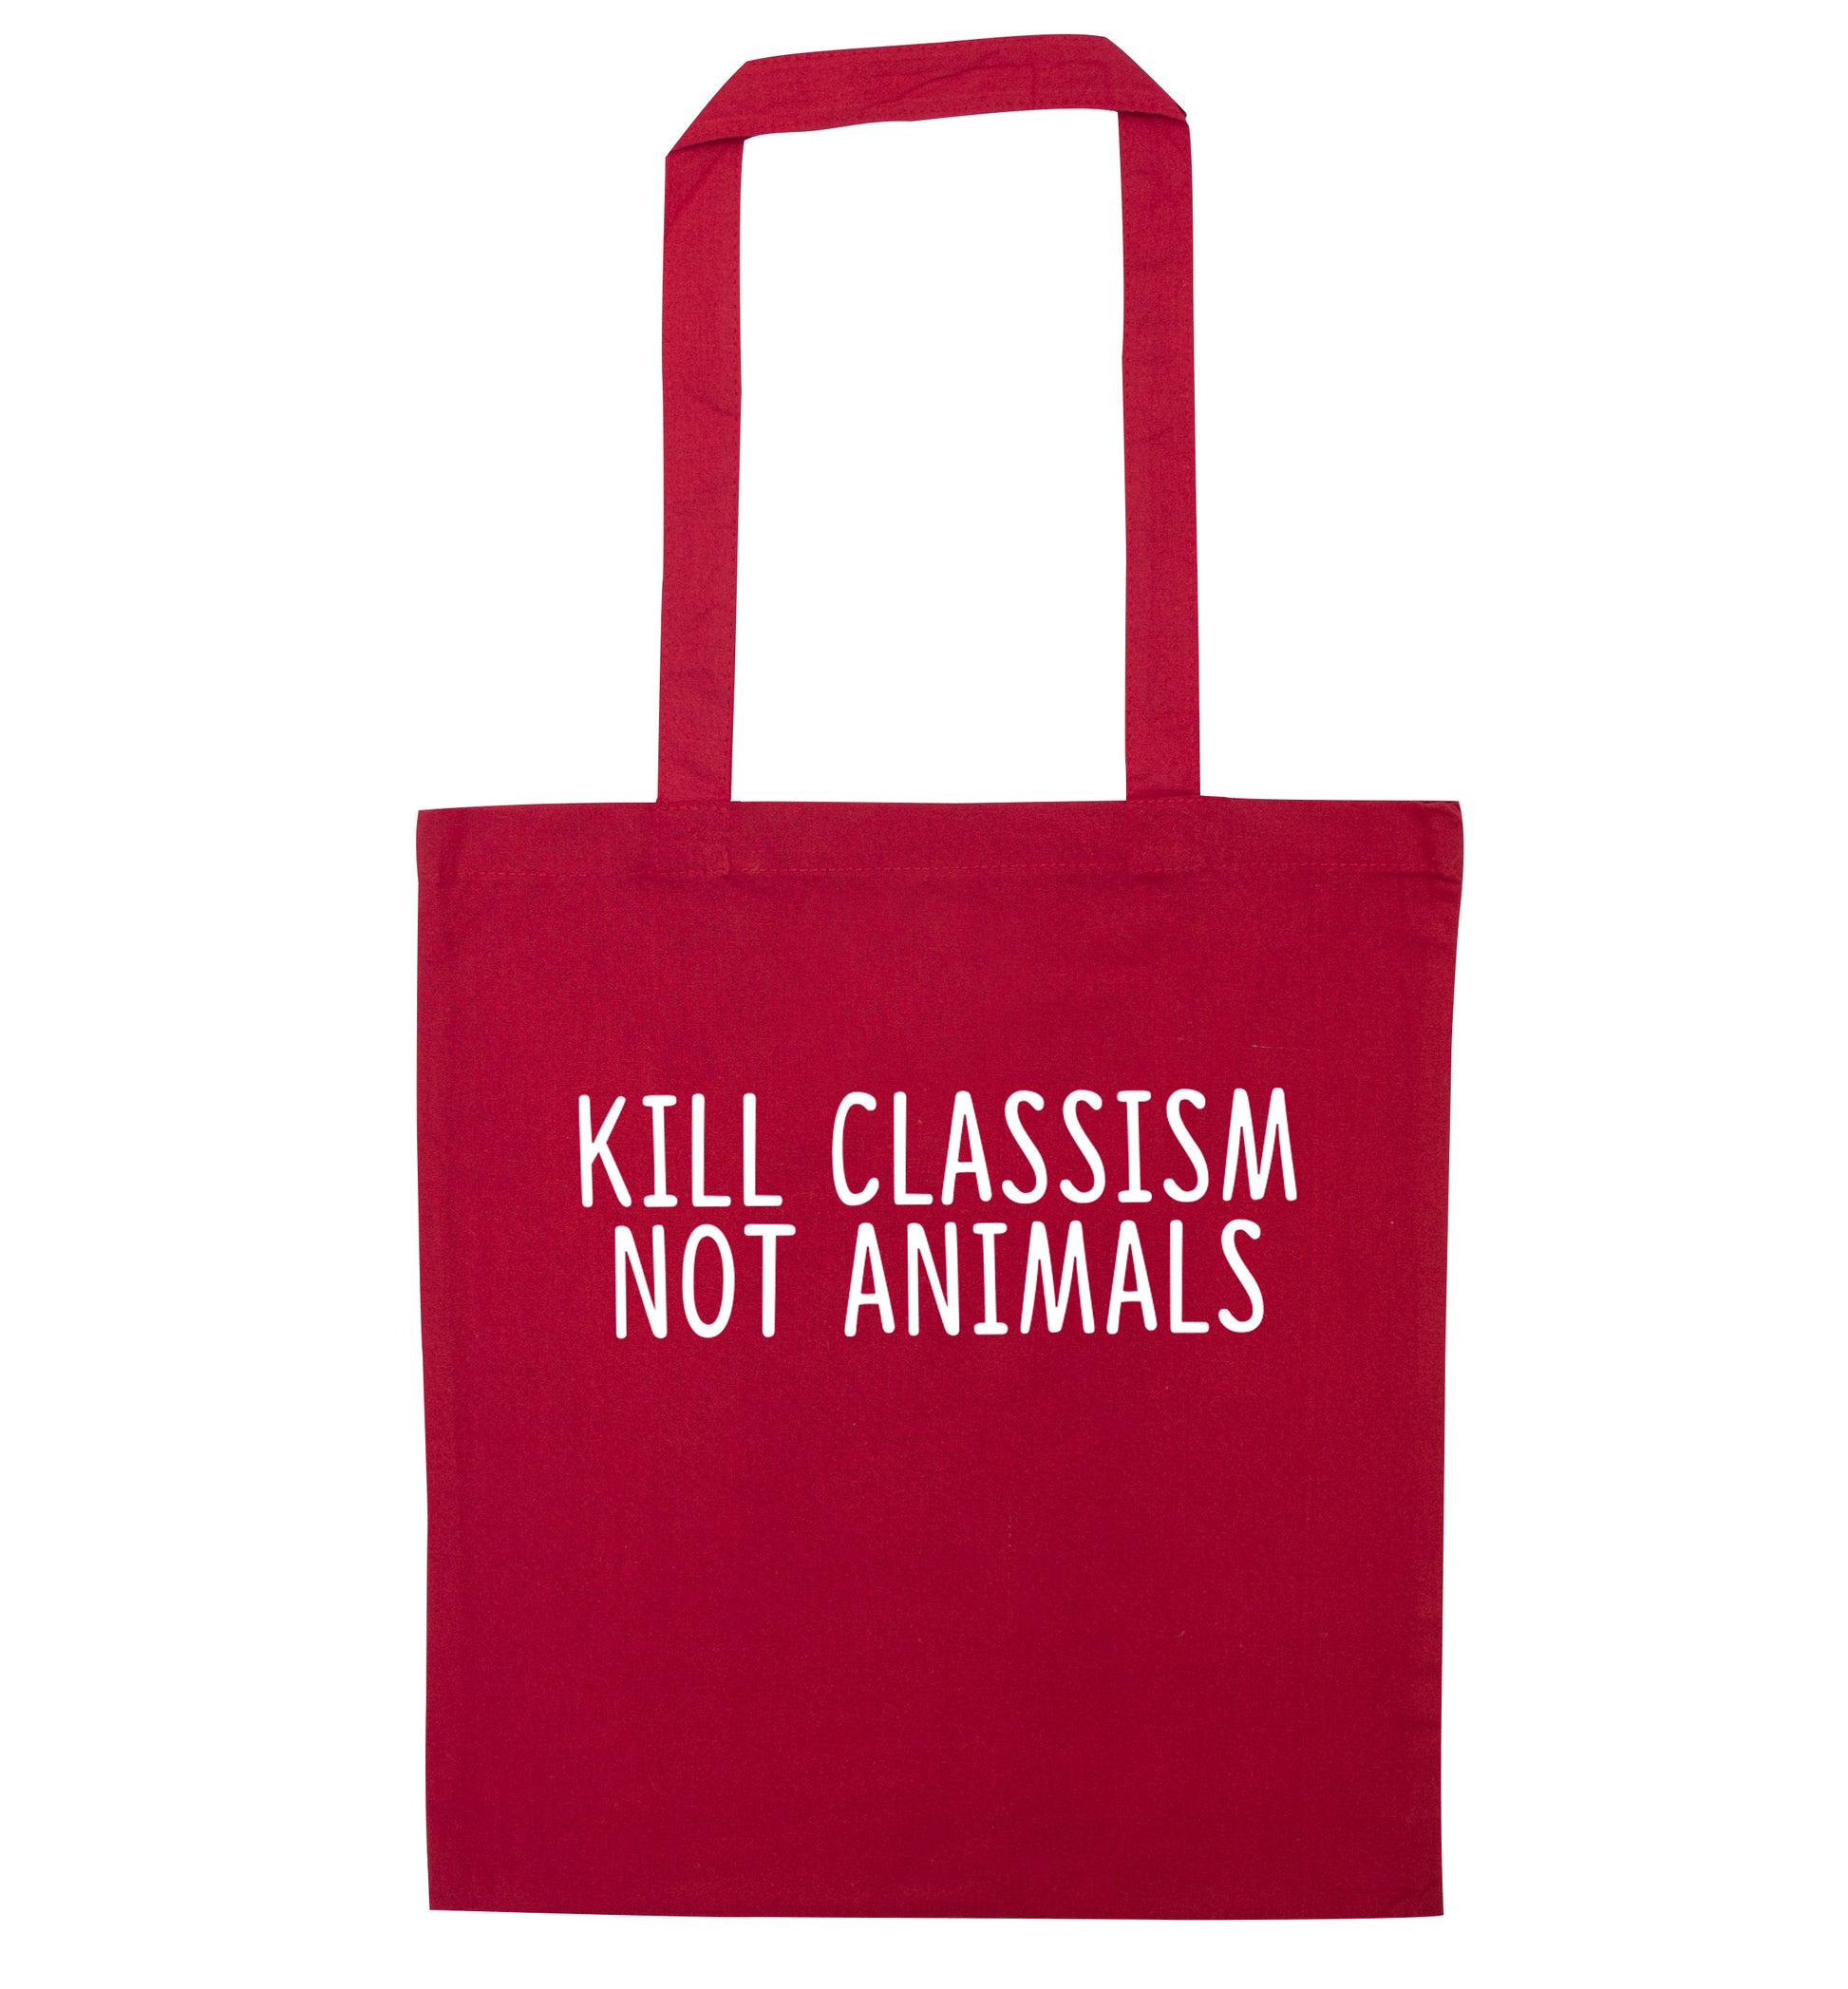 Kill Classism Not Animals red tote bag